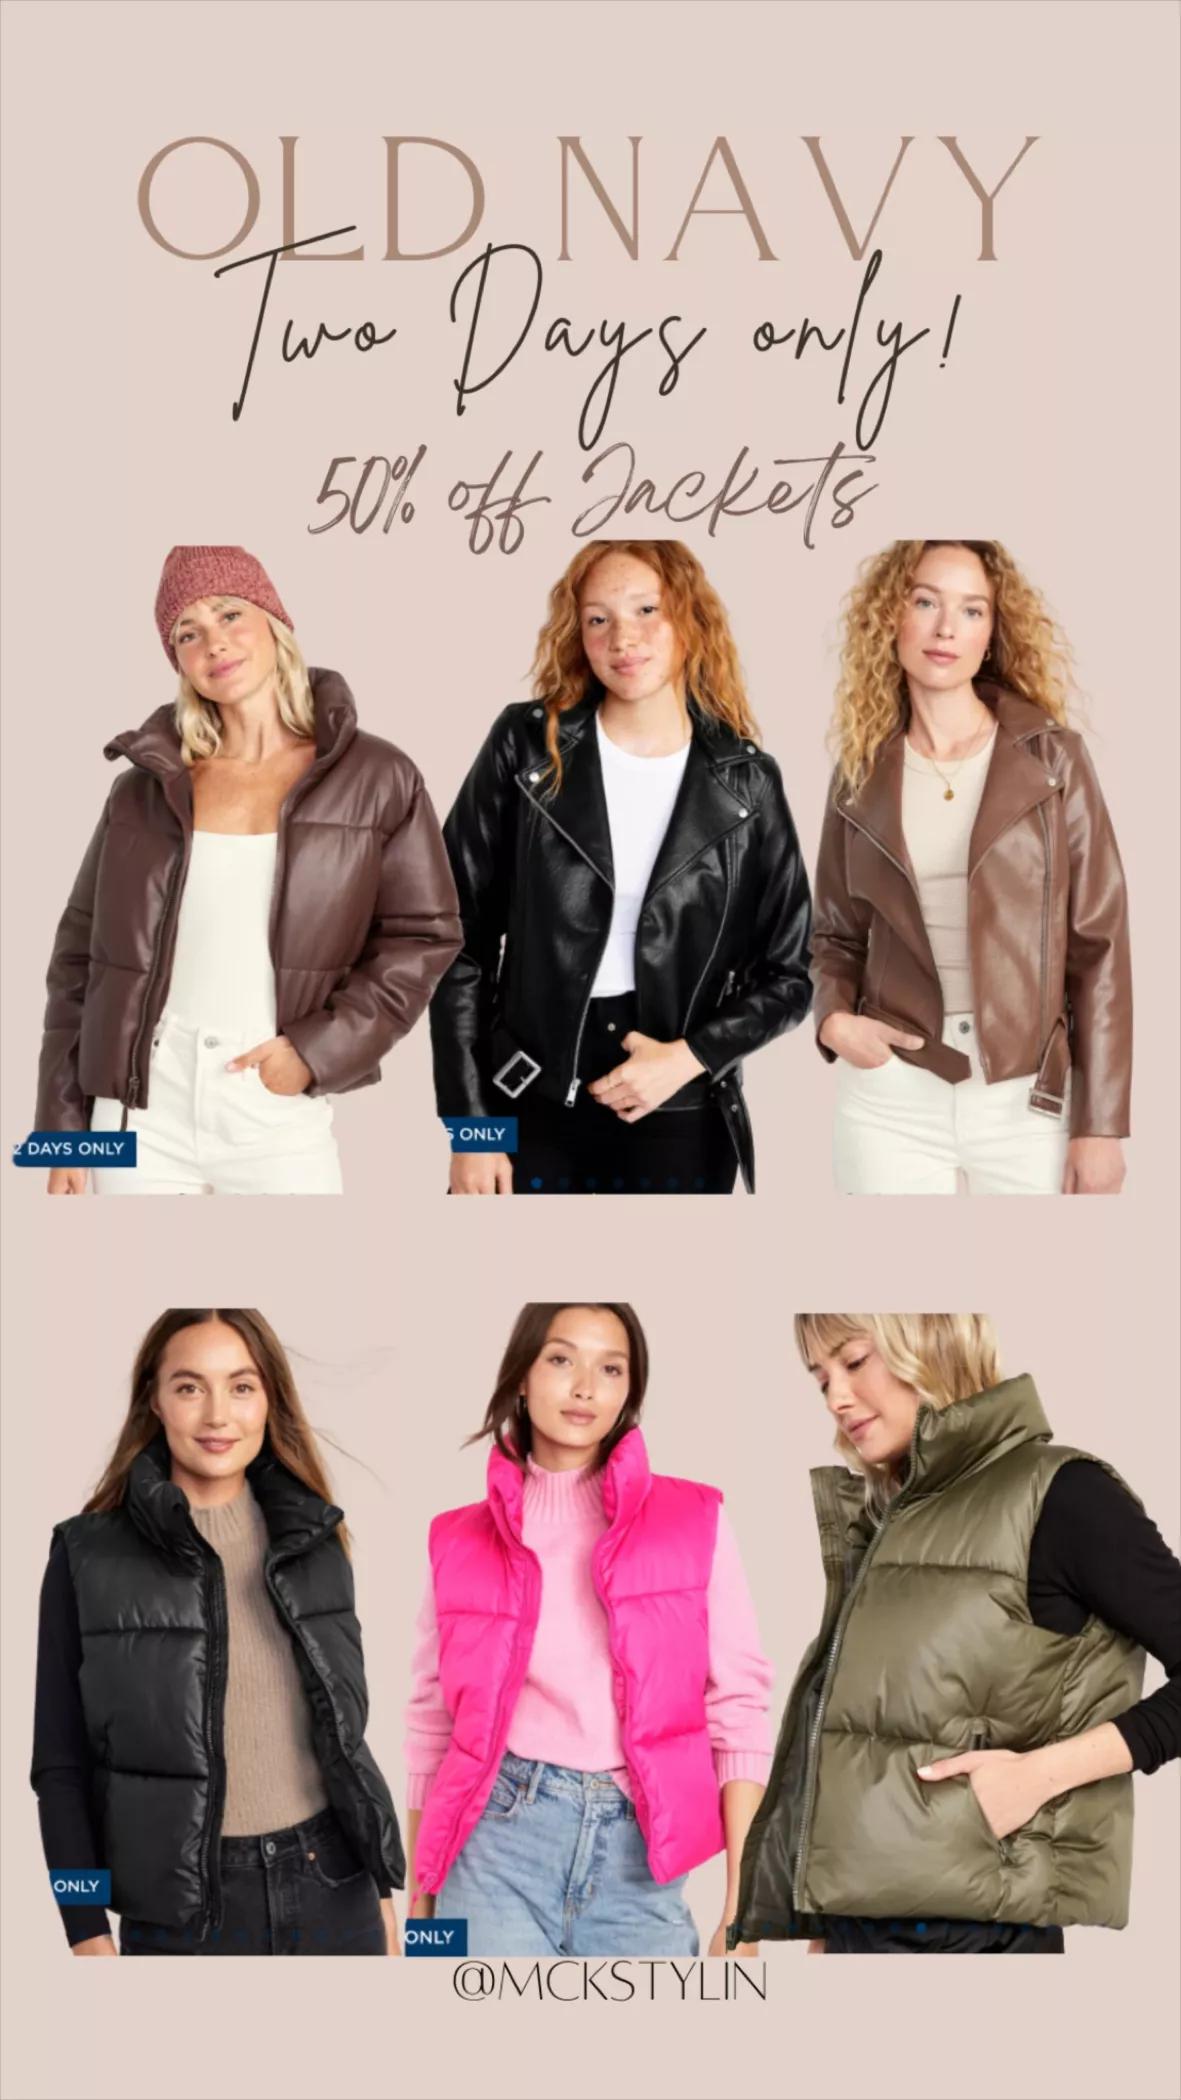 Mock-Neck Faux-Leather Puffer Jacket for Women